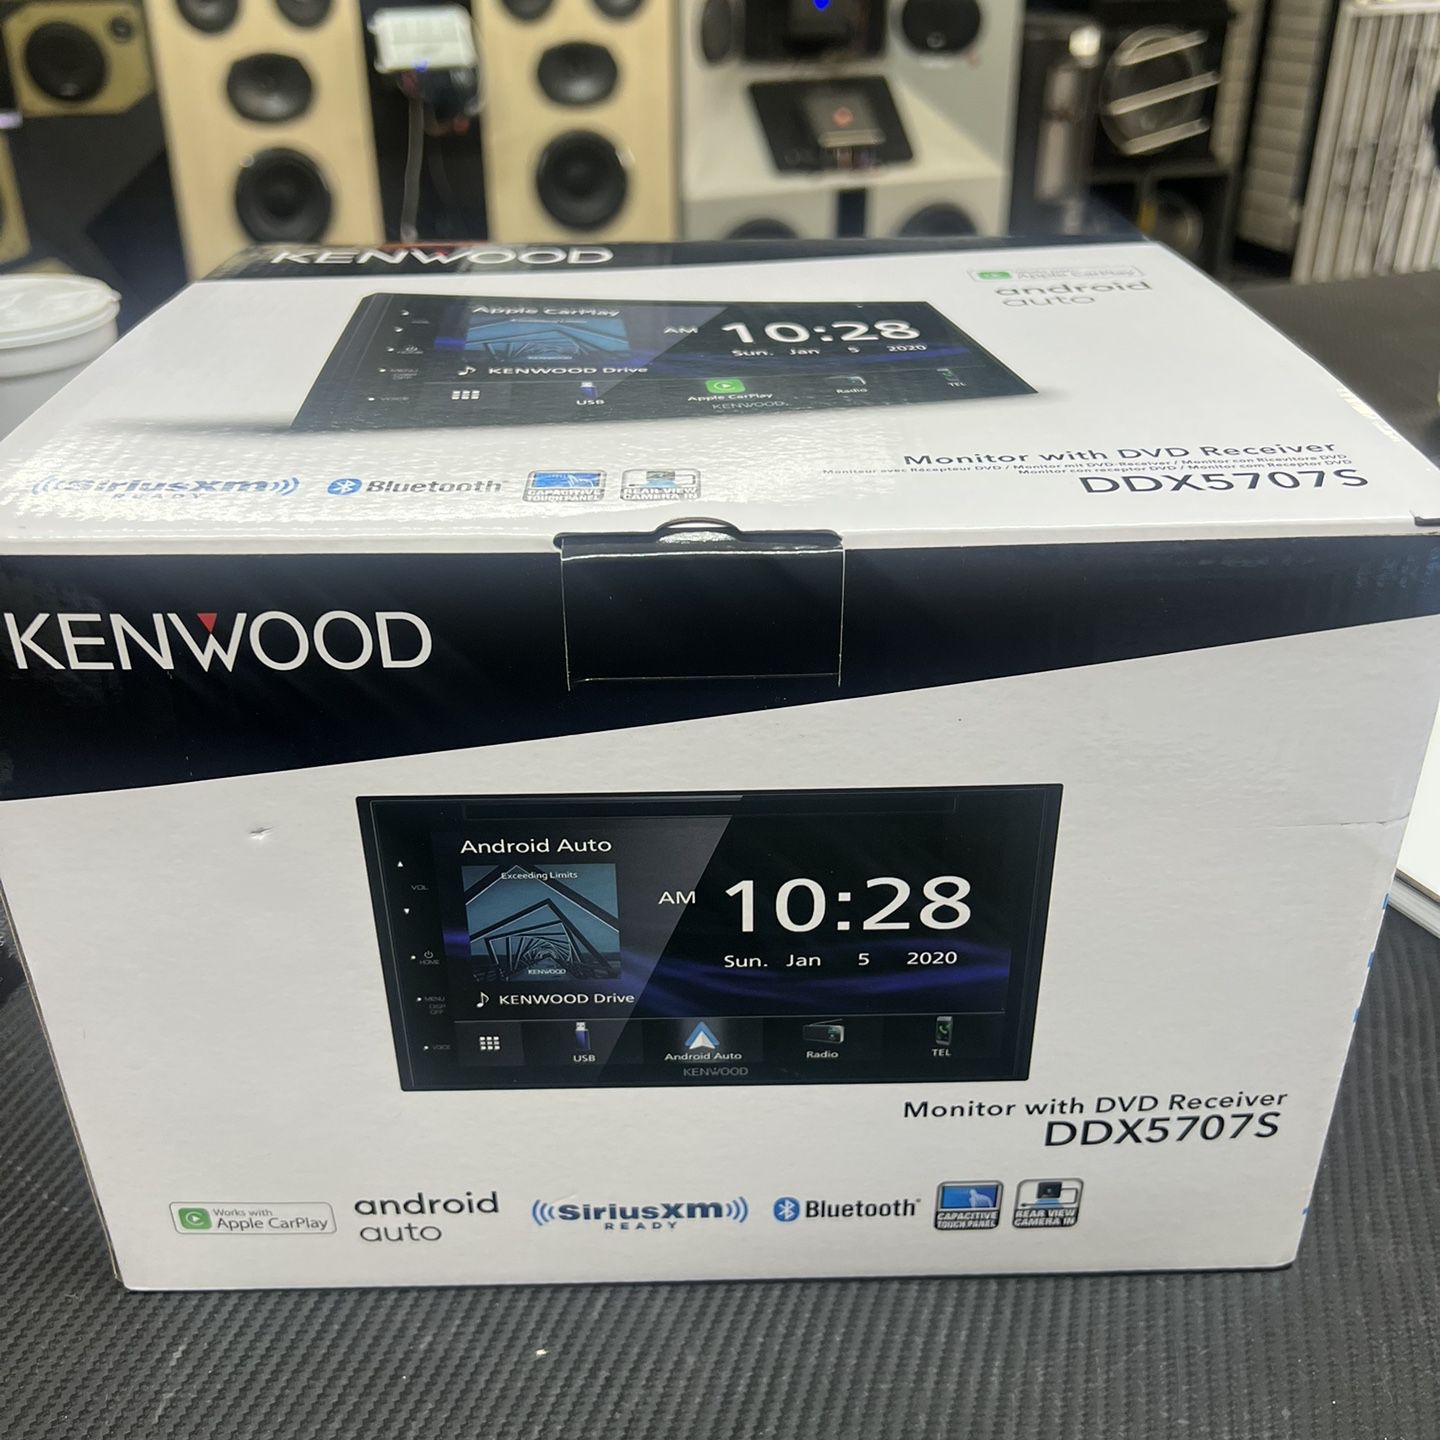 Outstanding offer on the Kenwood monitor featuring a DVD receiver that is both CarPlay and AndroAnd Android Auto 13 Payments Of $25. No Credit Needed.